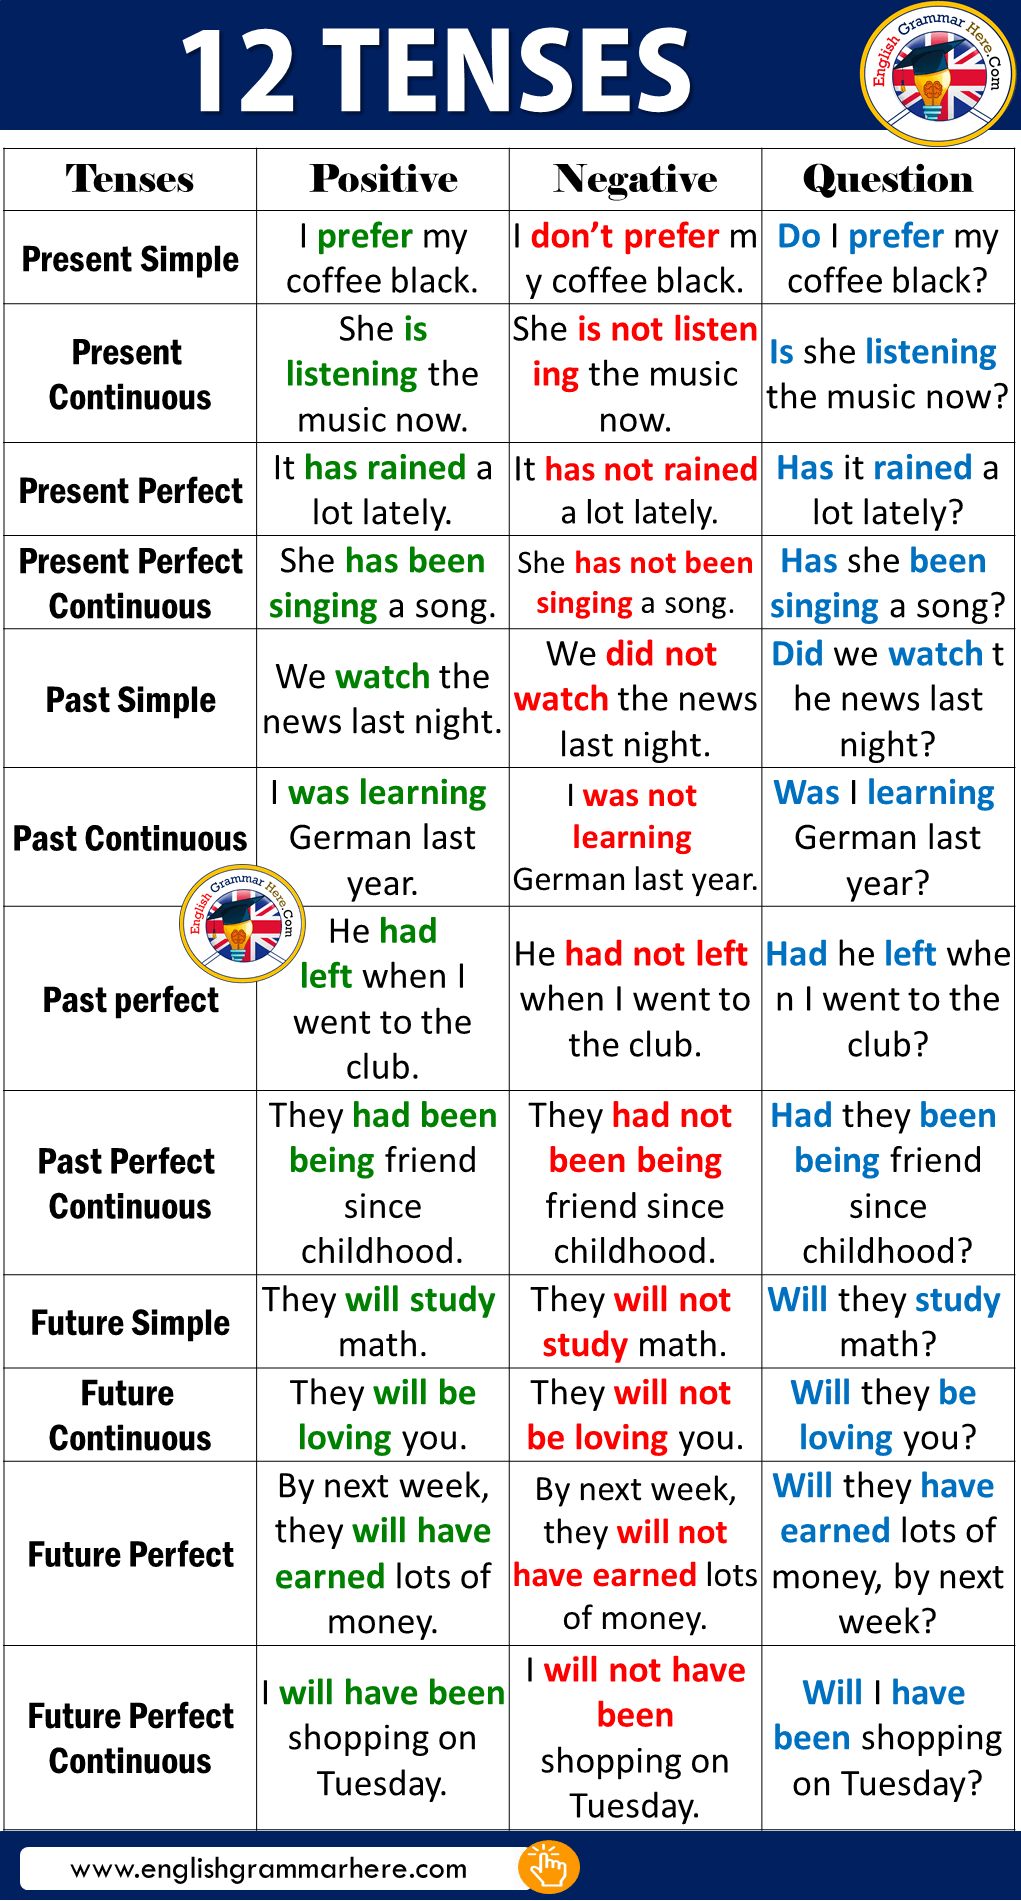 12 Tenses in English - English Grammar Here